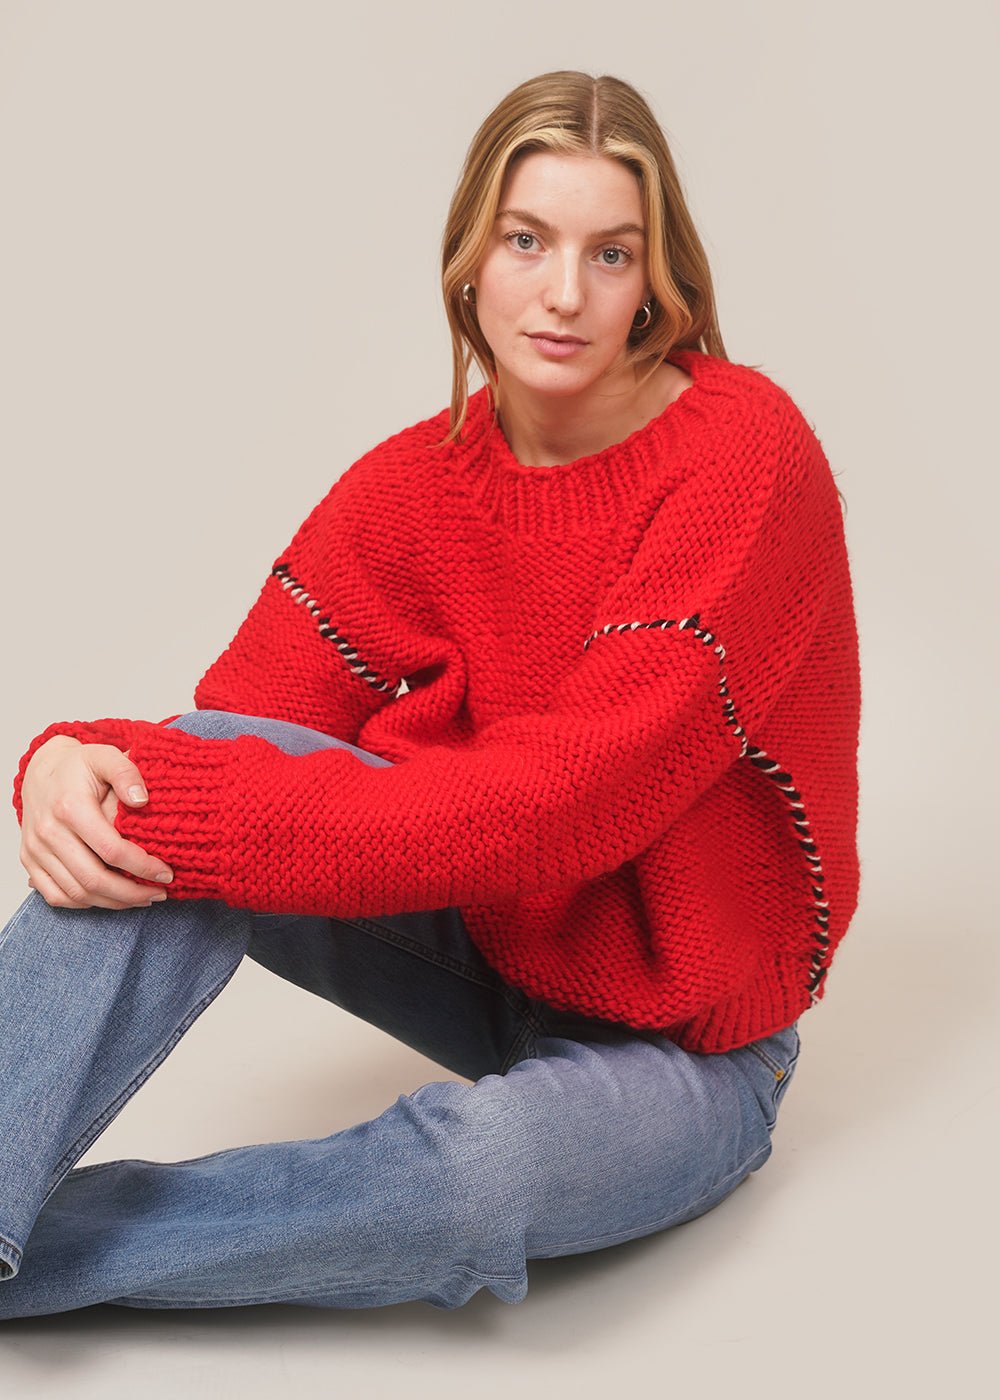 Frisson Knits Red Deconstructed Sweater - New Classics Studios Sustainable Ethical Fashion Canada